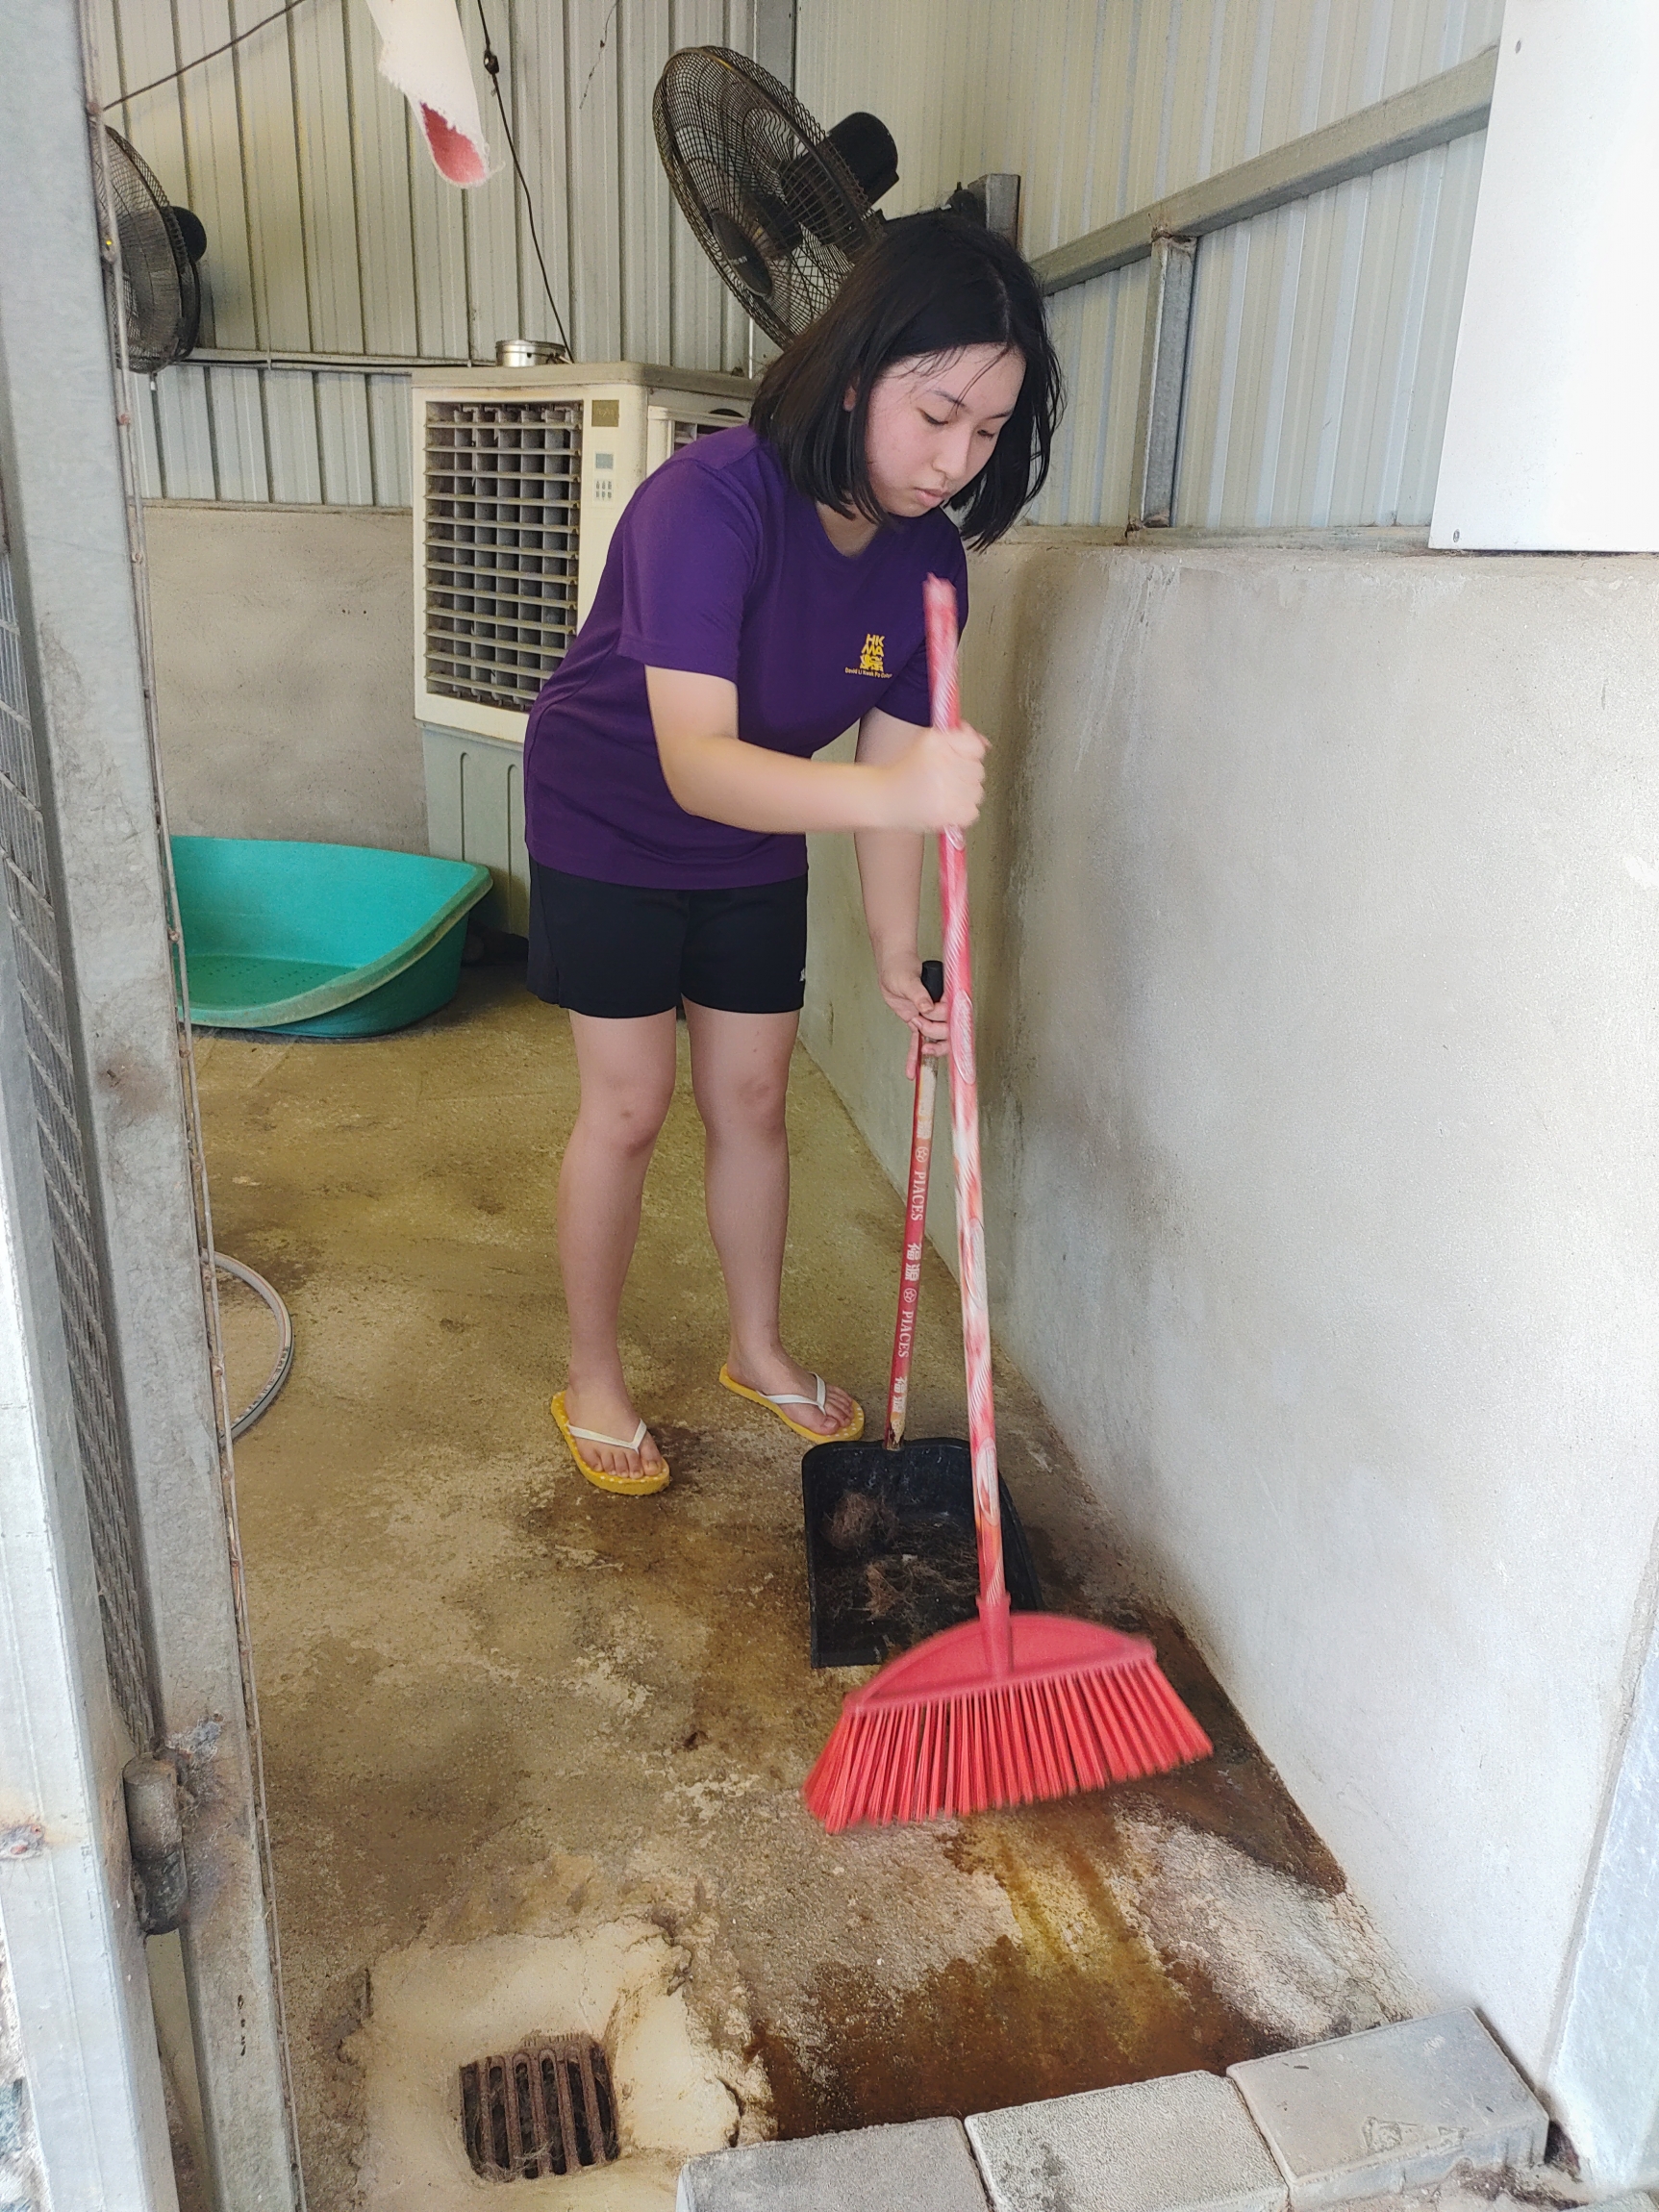 Self Photos / Files - Dog Shelter Cleaning1